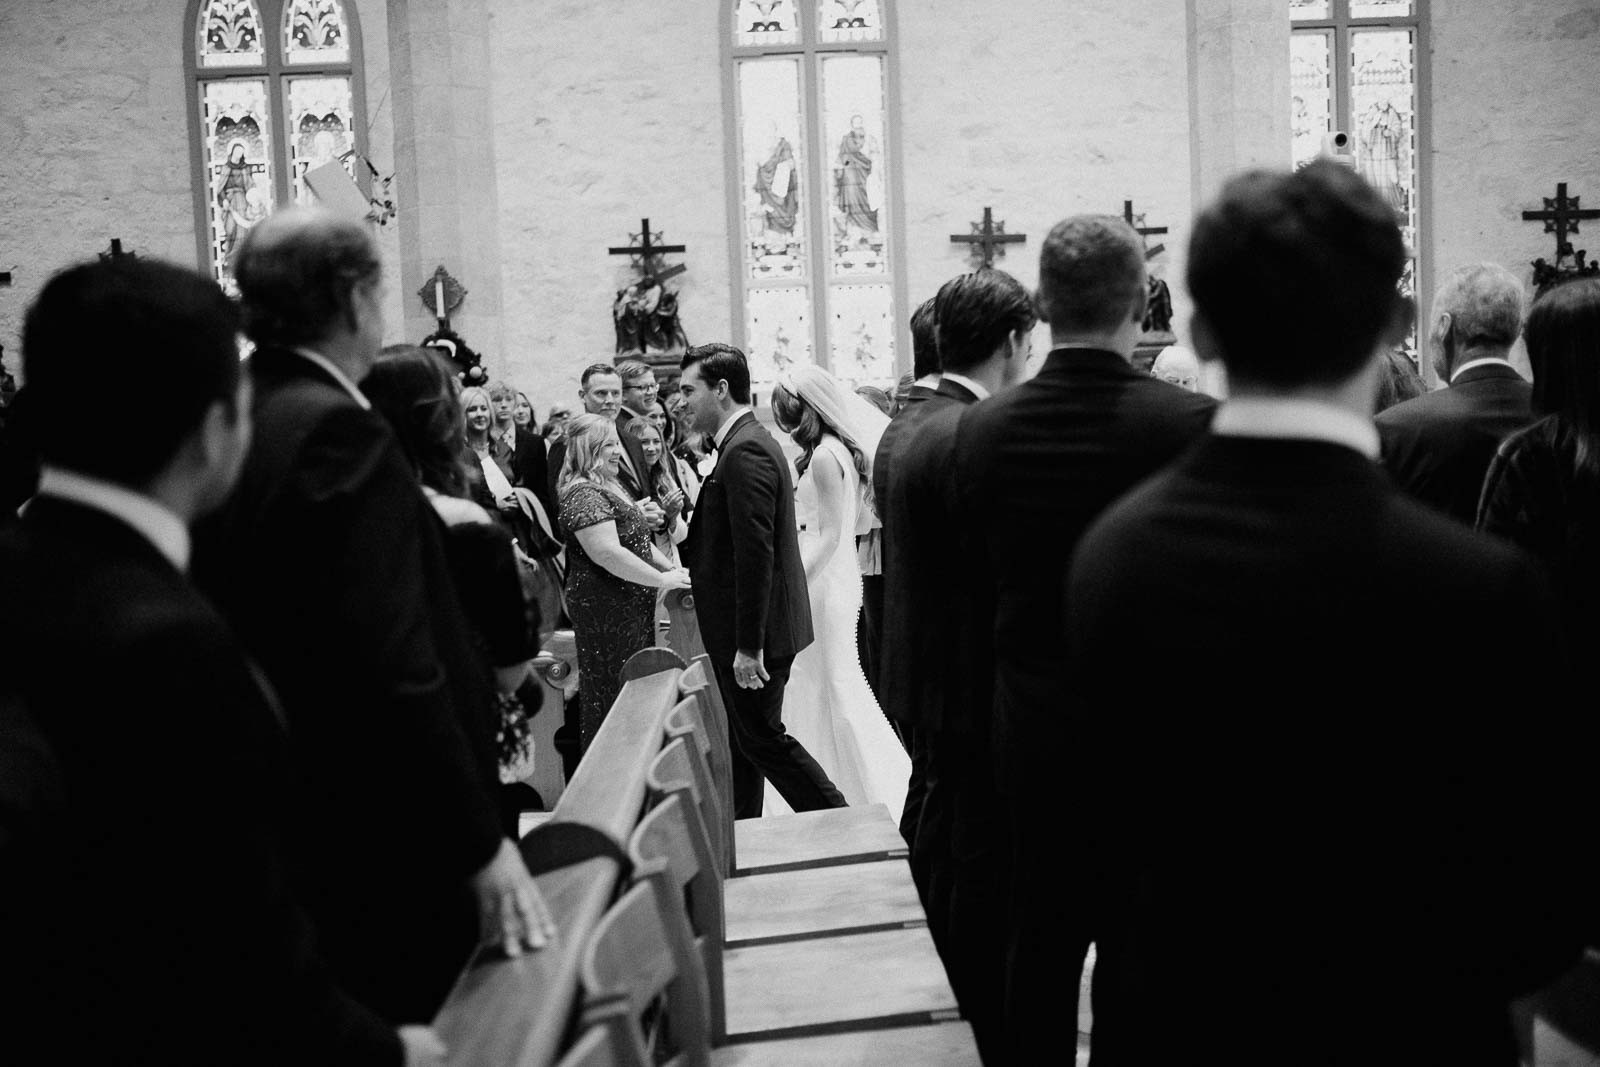 A side view from a church pew as the newly wedded couple are applauded by church attendees